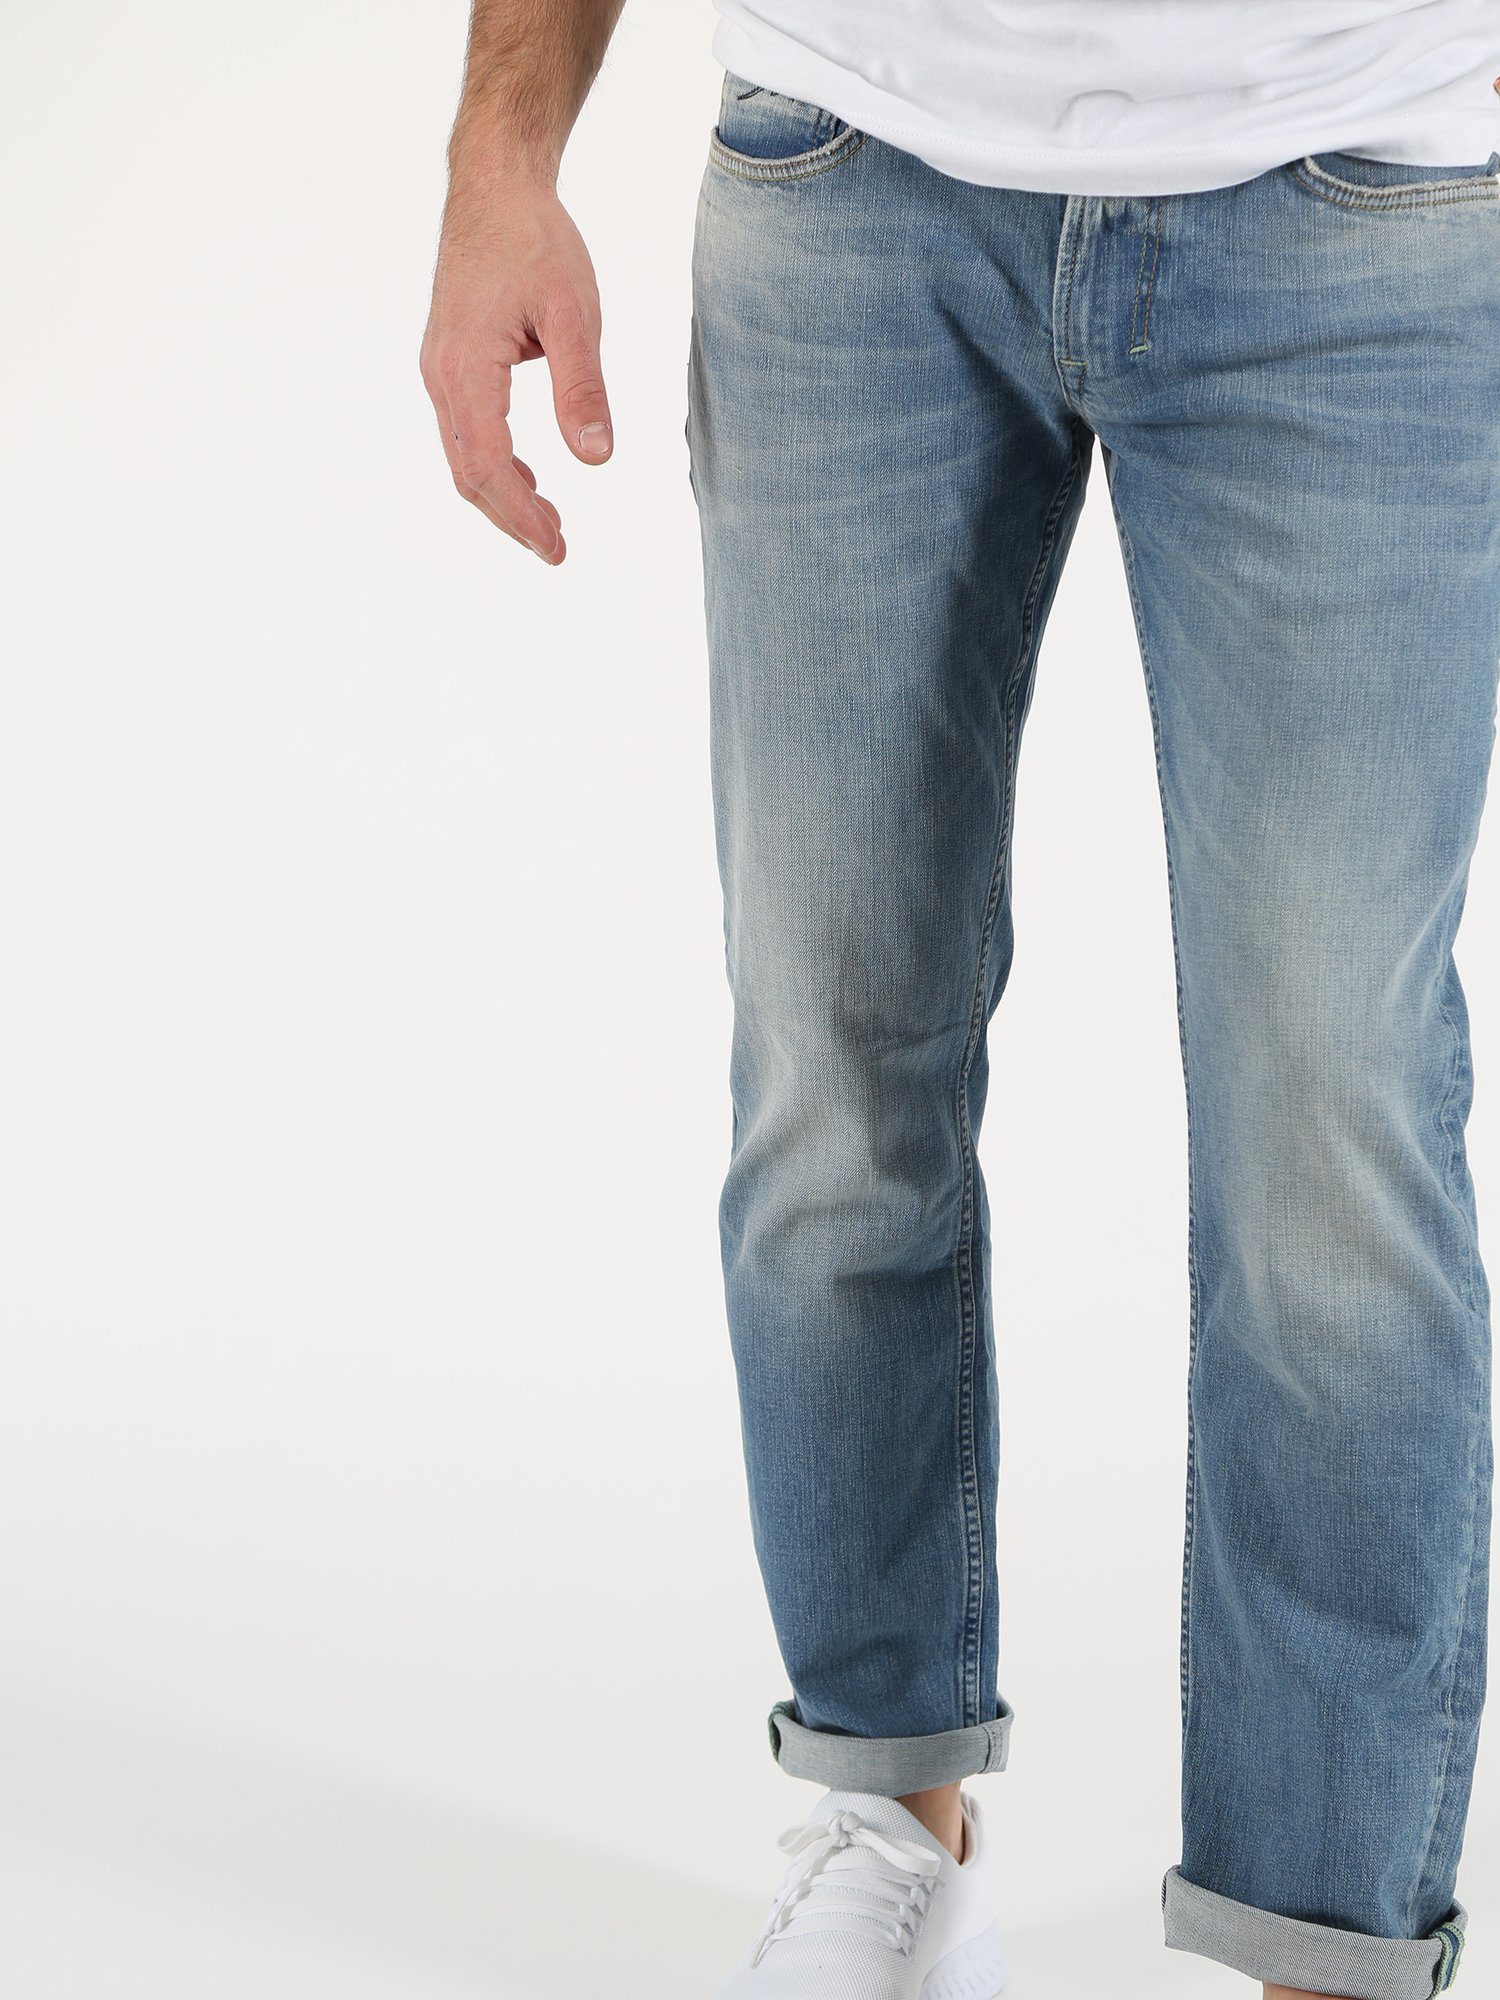 Miracle of 5-Pocket-Jeans JEANS THOMAS MOD Denim SP21-1009.1977 lincoln blue